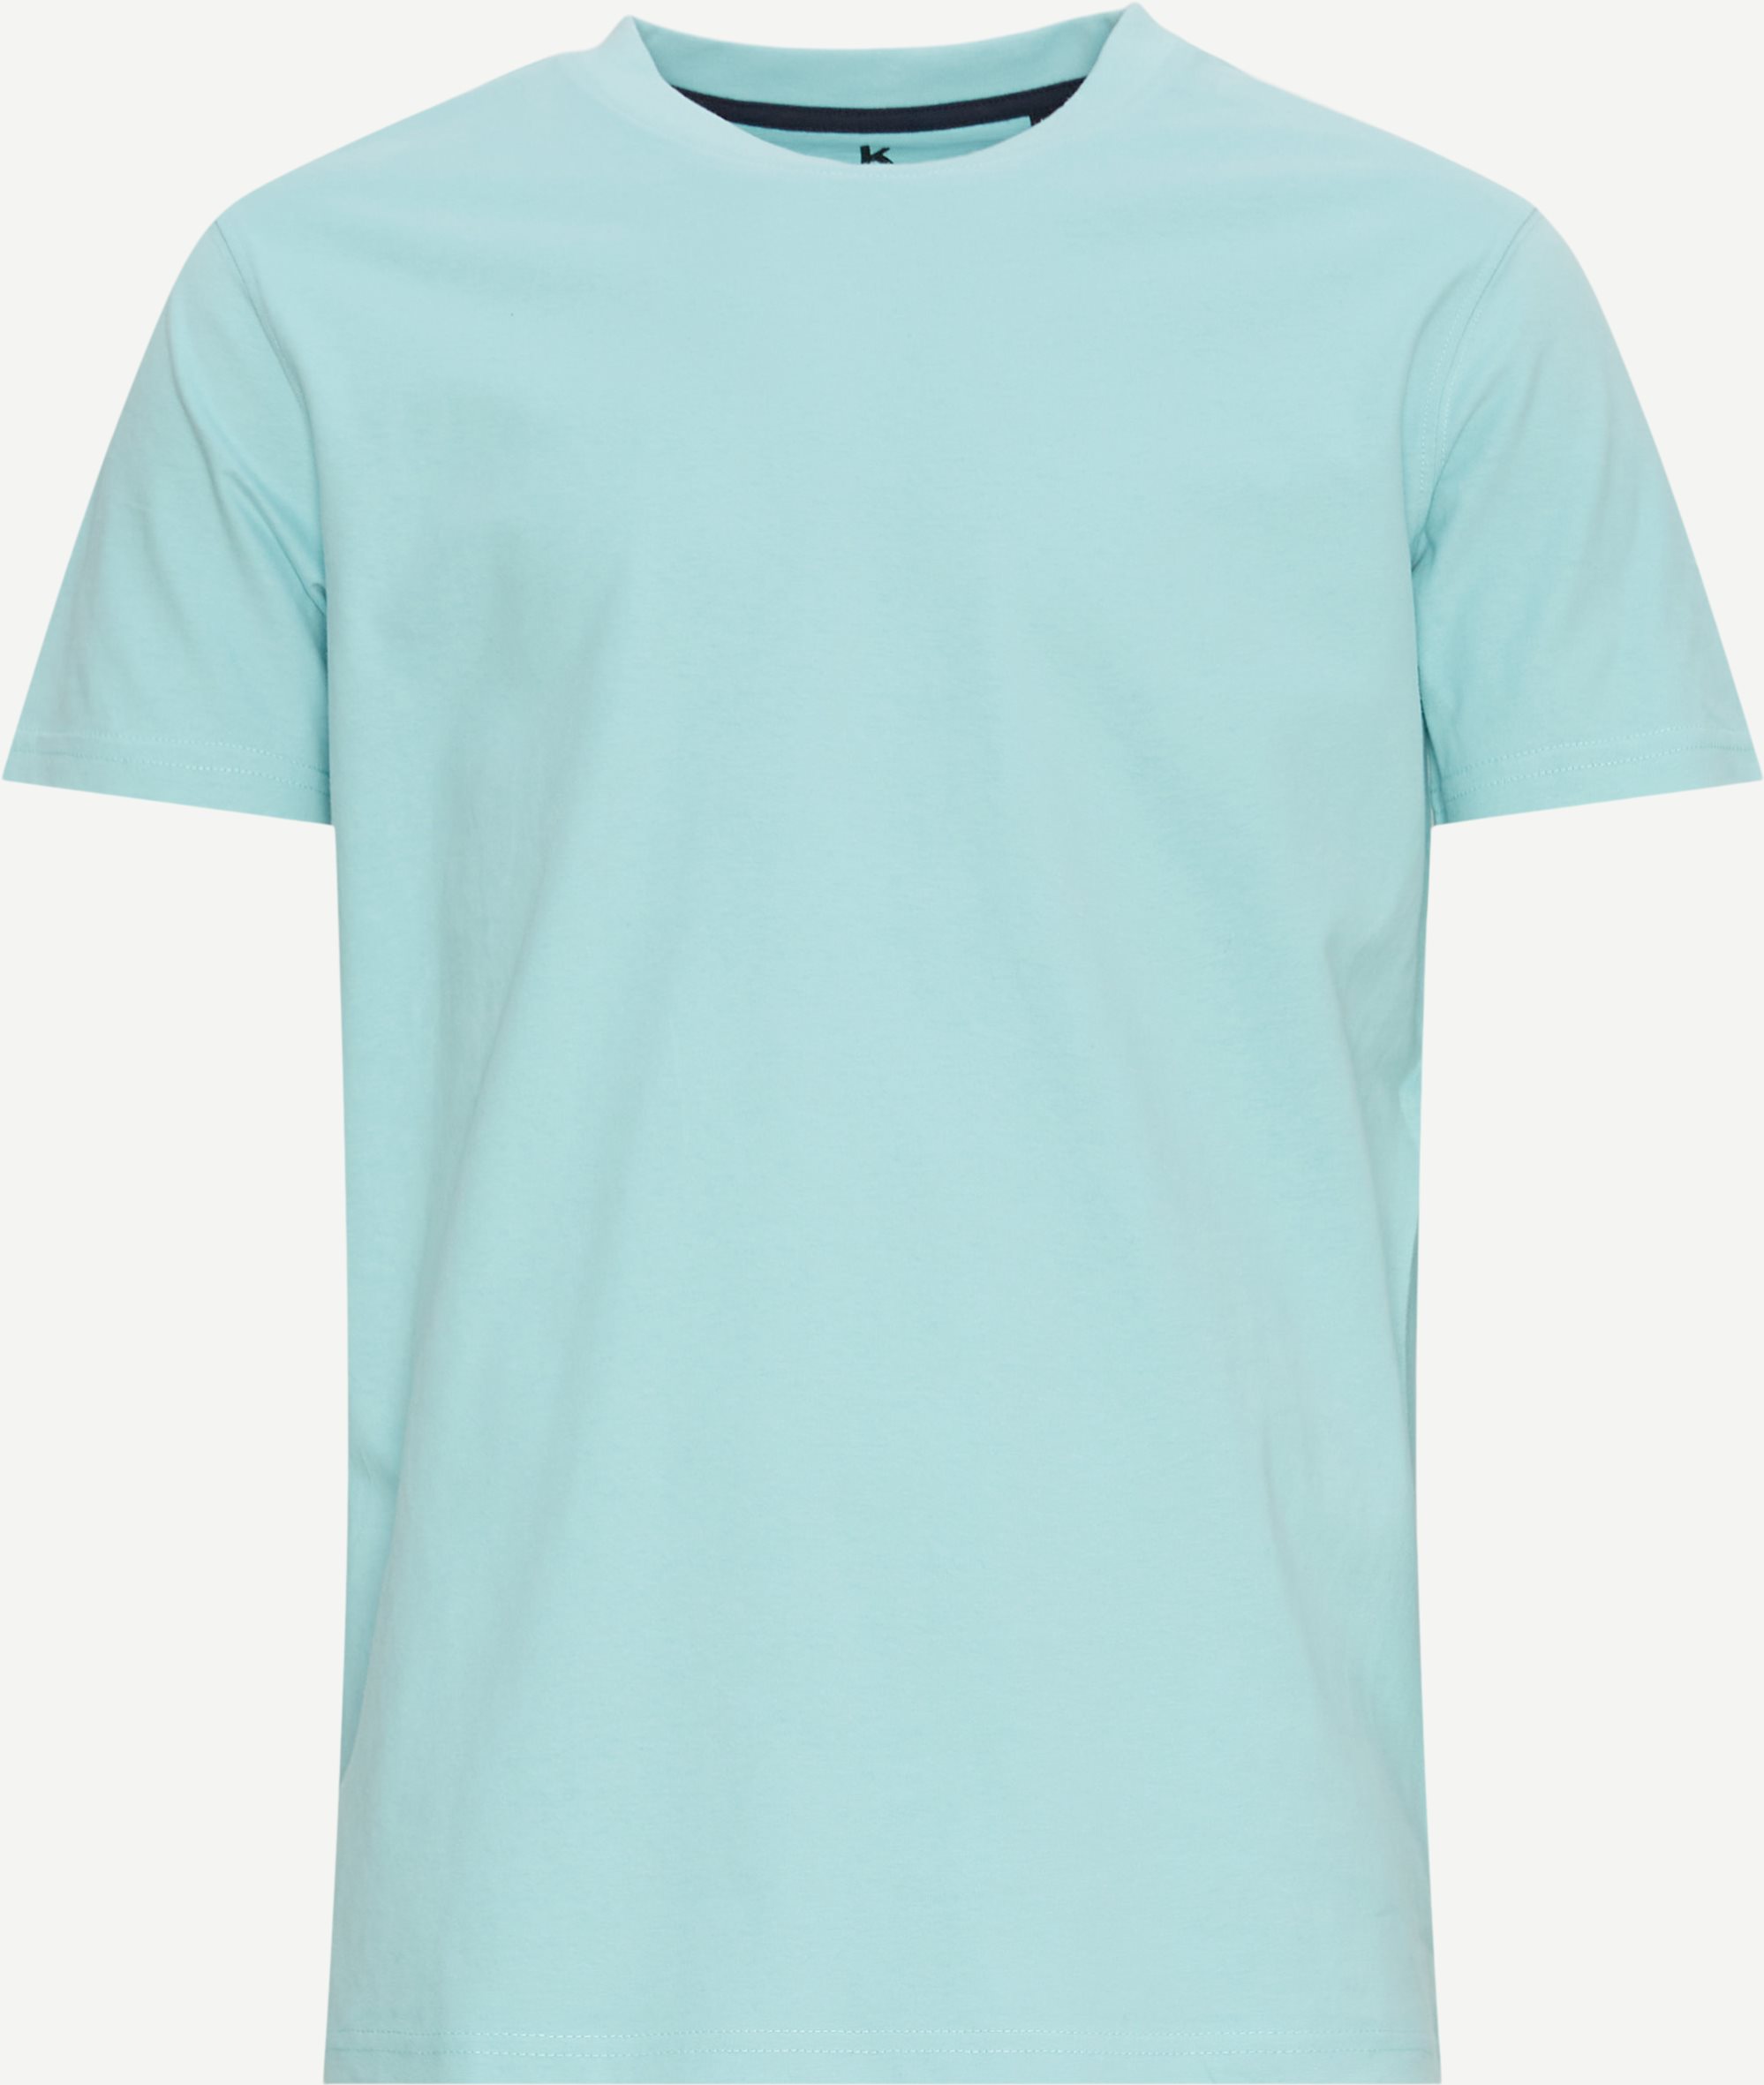 K BY KAUFMANN T-shirts GREASE Turquoise